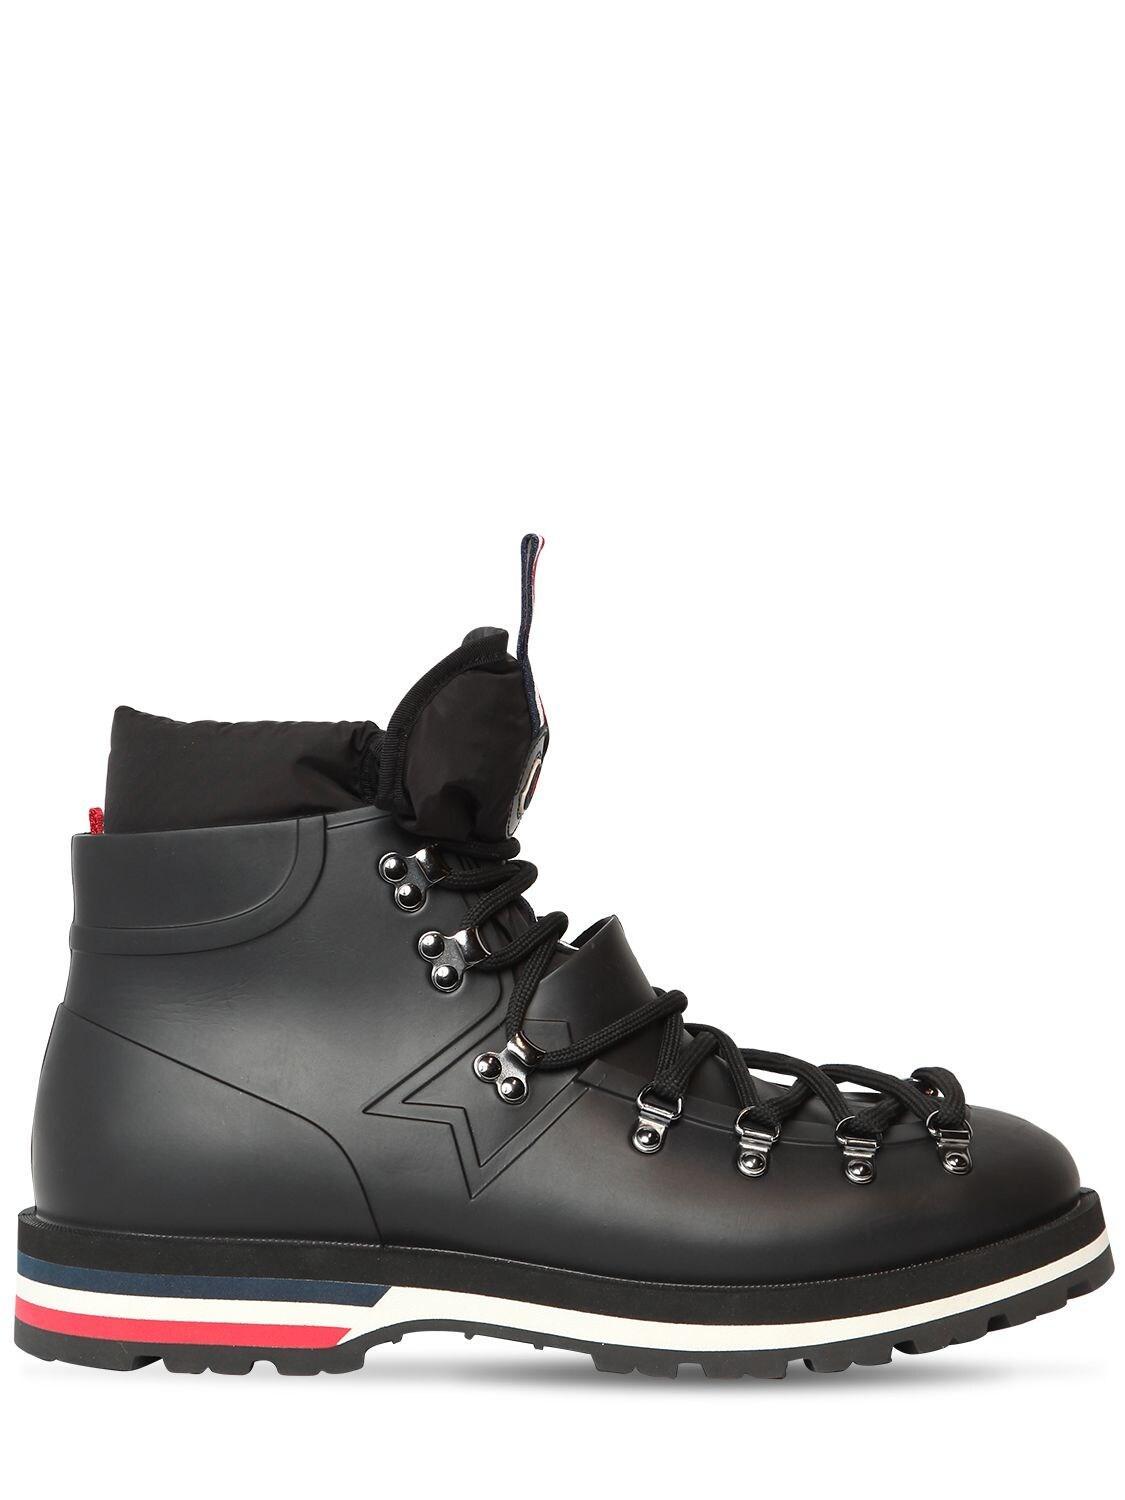 Moncler Synthetic Henoc Rubber Lace-up Boots in Black for Men - Lyst